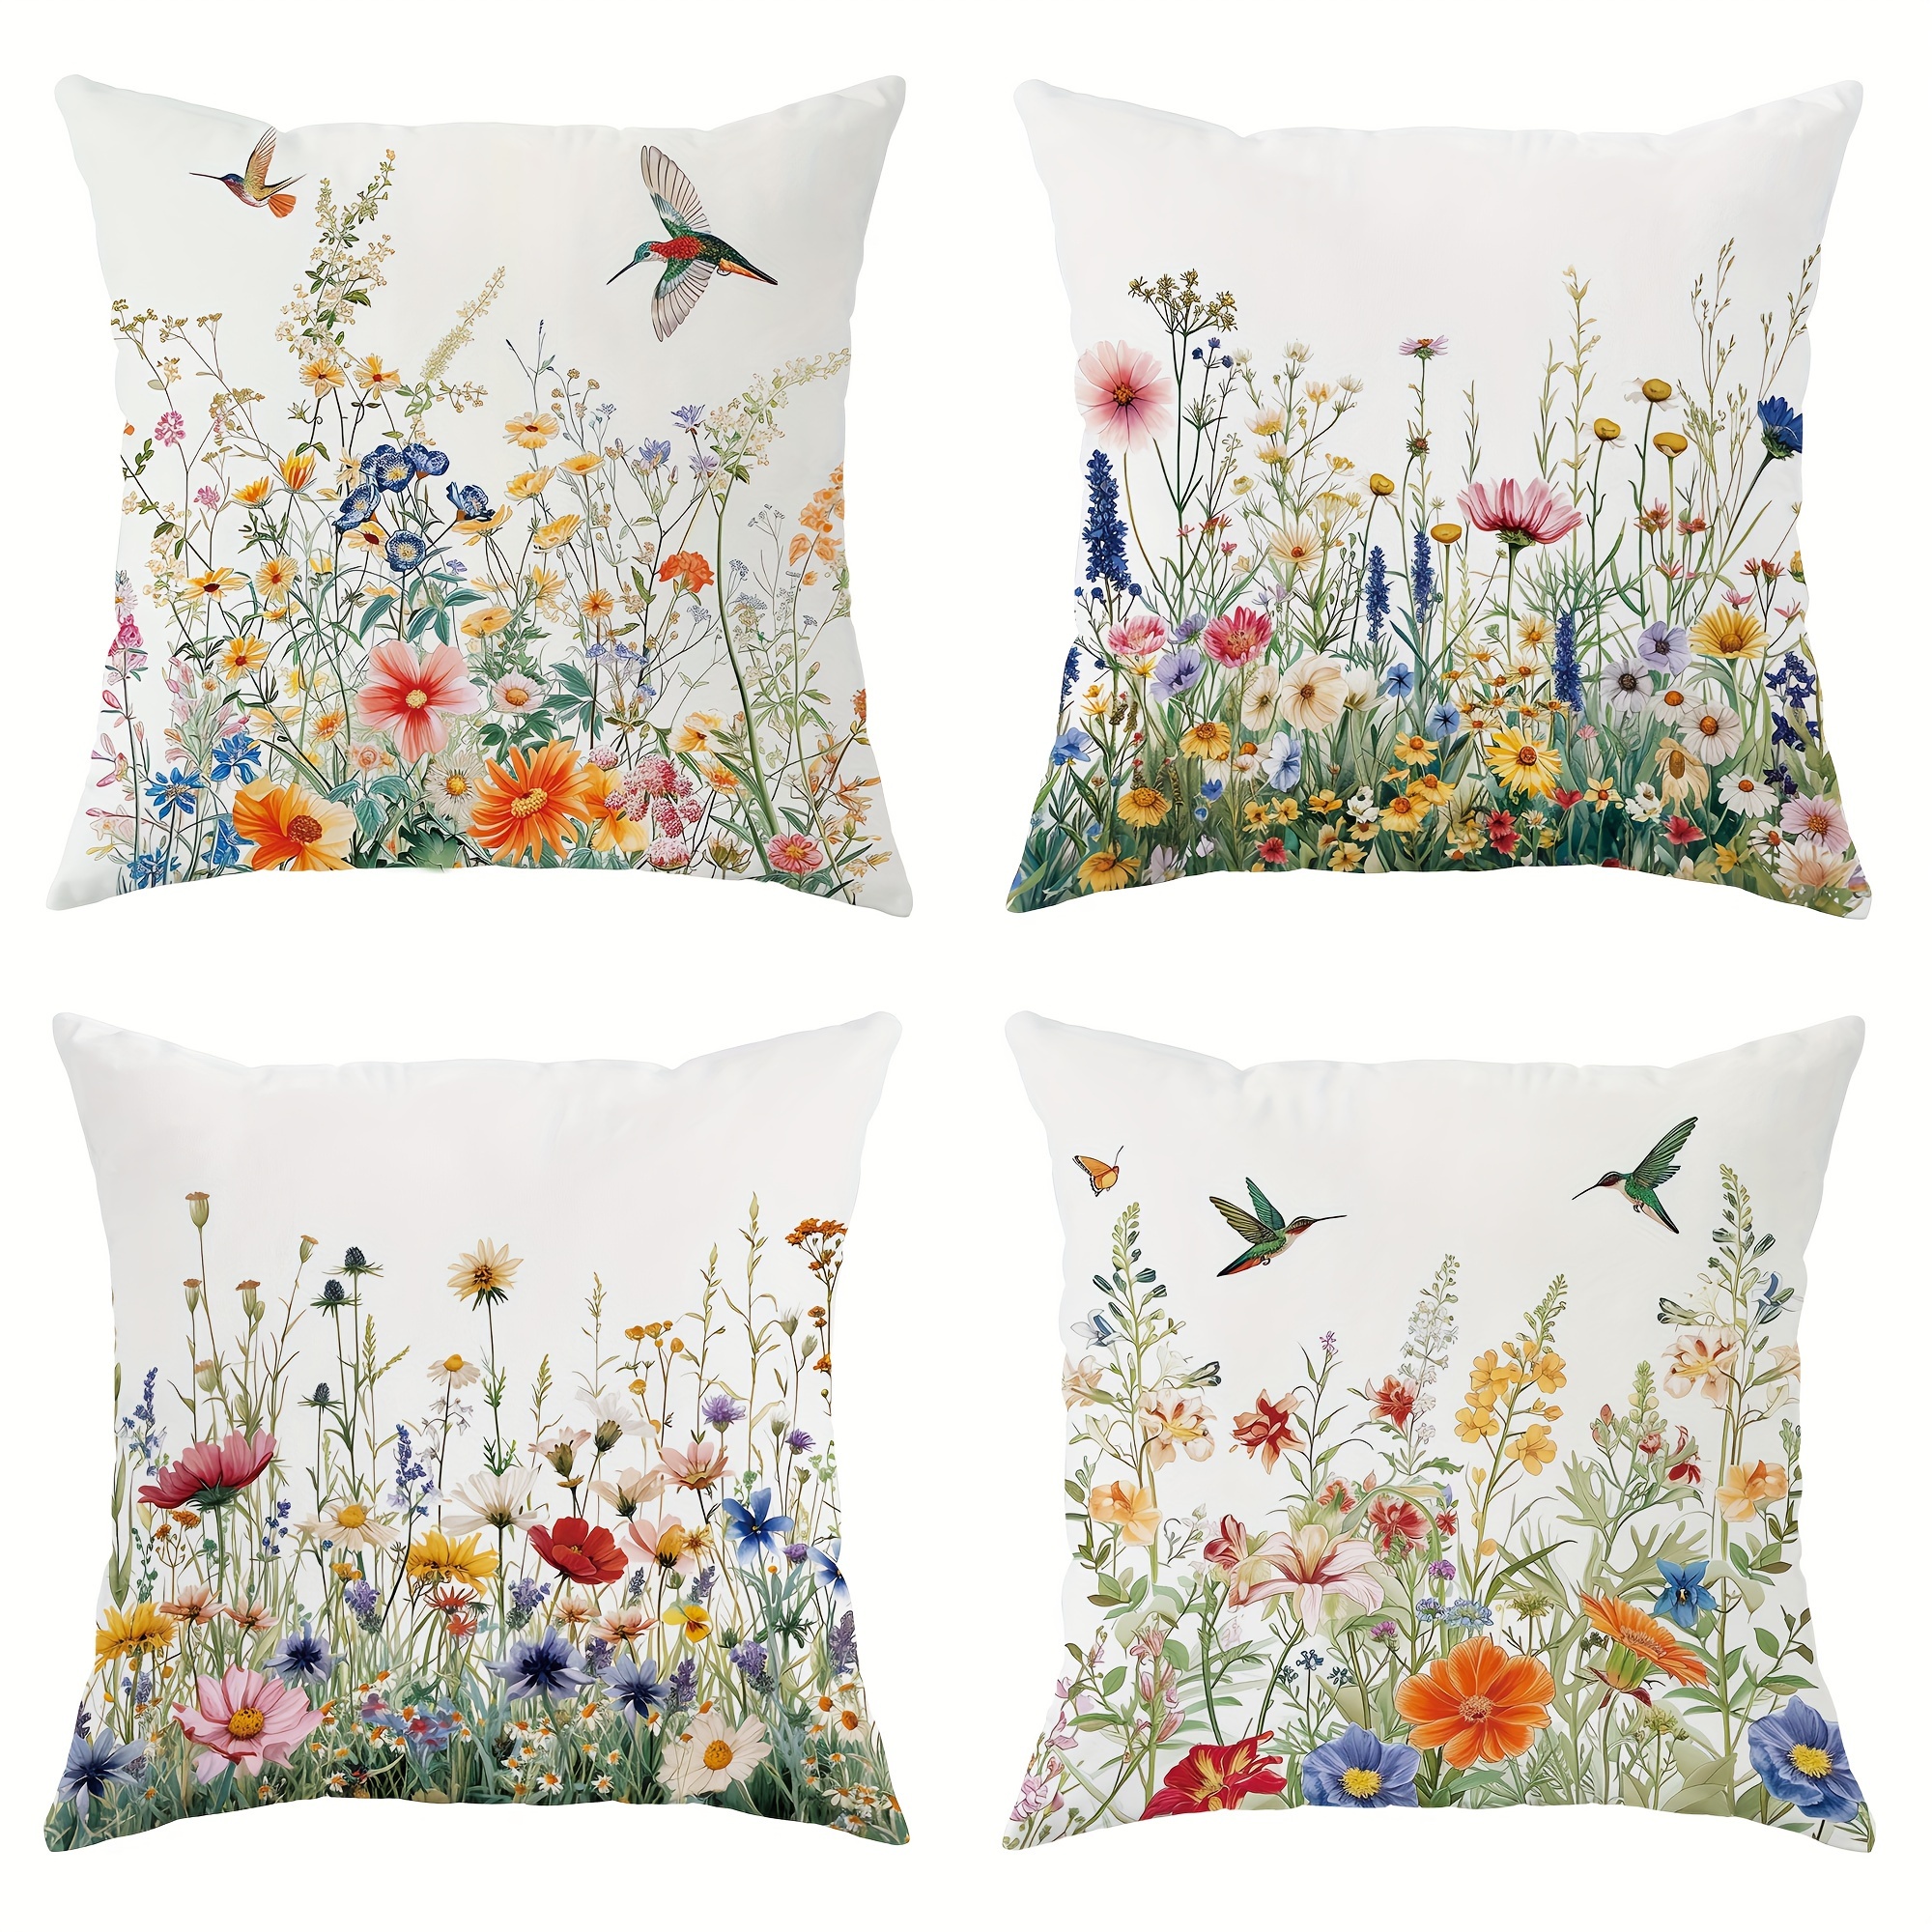 

4pcs Velvet Throw Pillow Covers, Country Rustic Floral Hummingbird White Decorative Pillow Covers, 18in*18in, For Living Room Bedroom Sofa Bed Decoration, Without Pillow Inserts